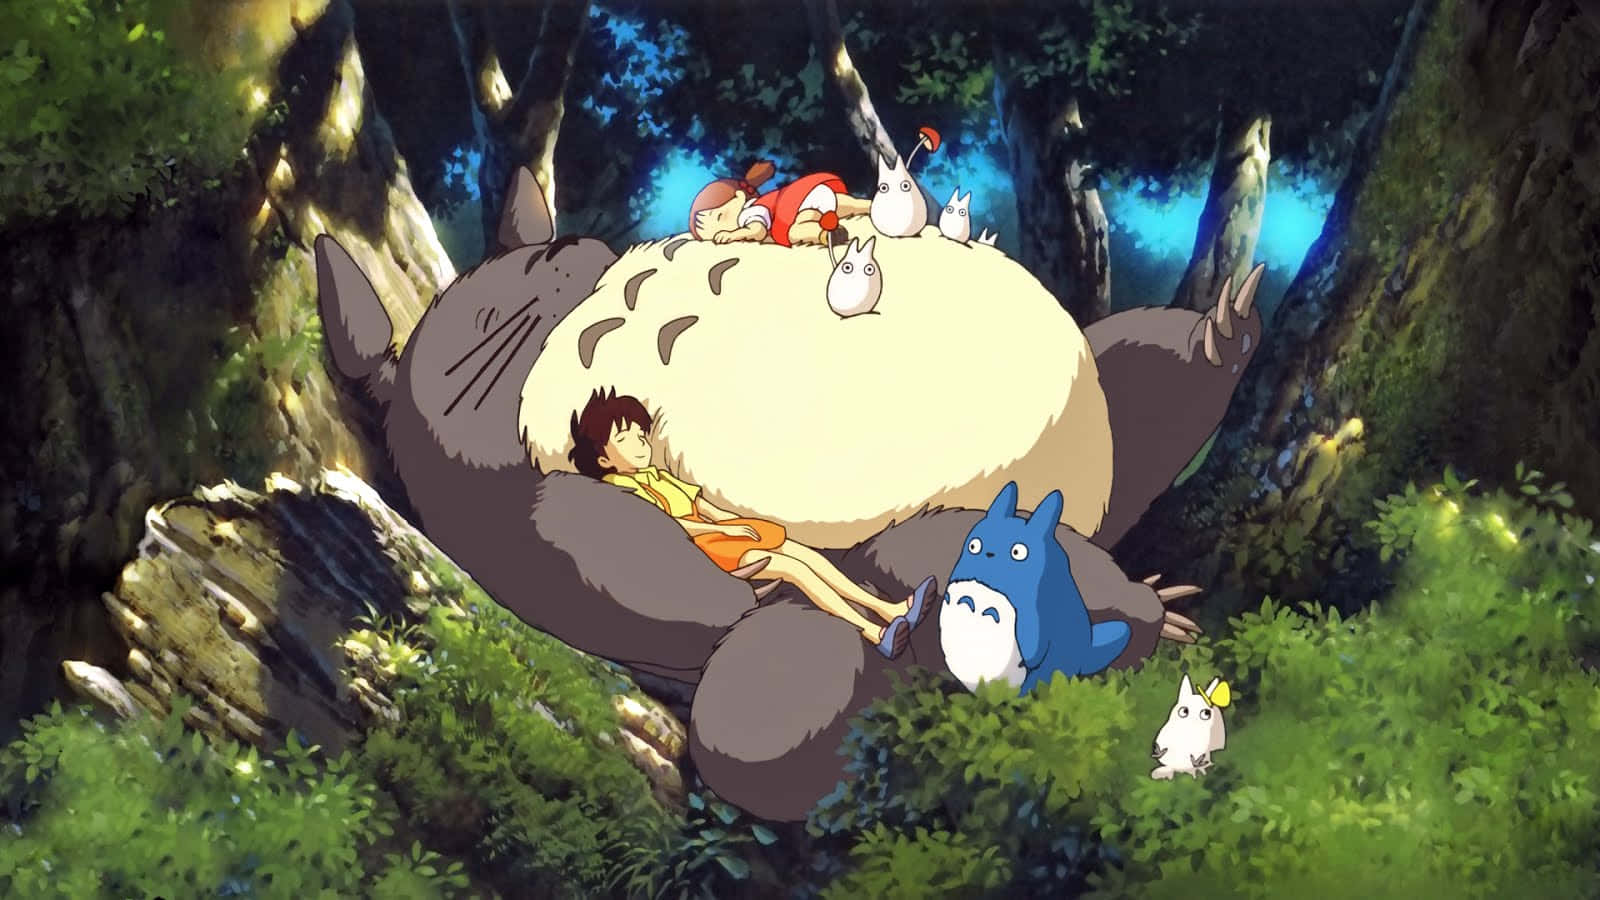 A Group Of People Sitting On Top Of A Giant Totoro